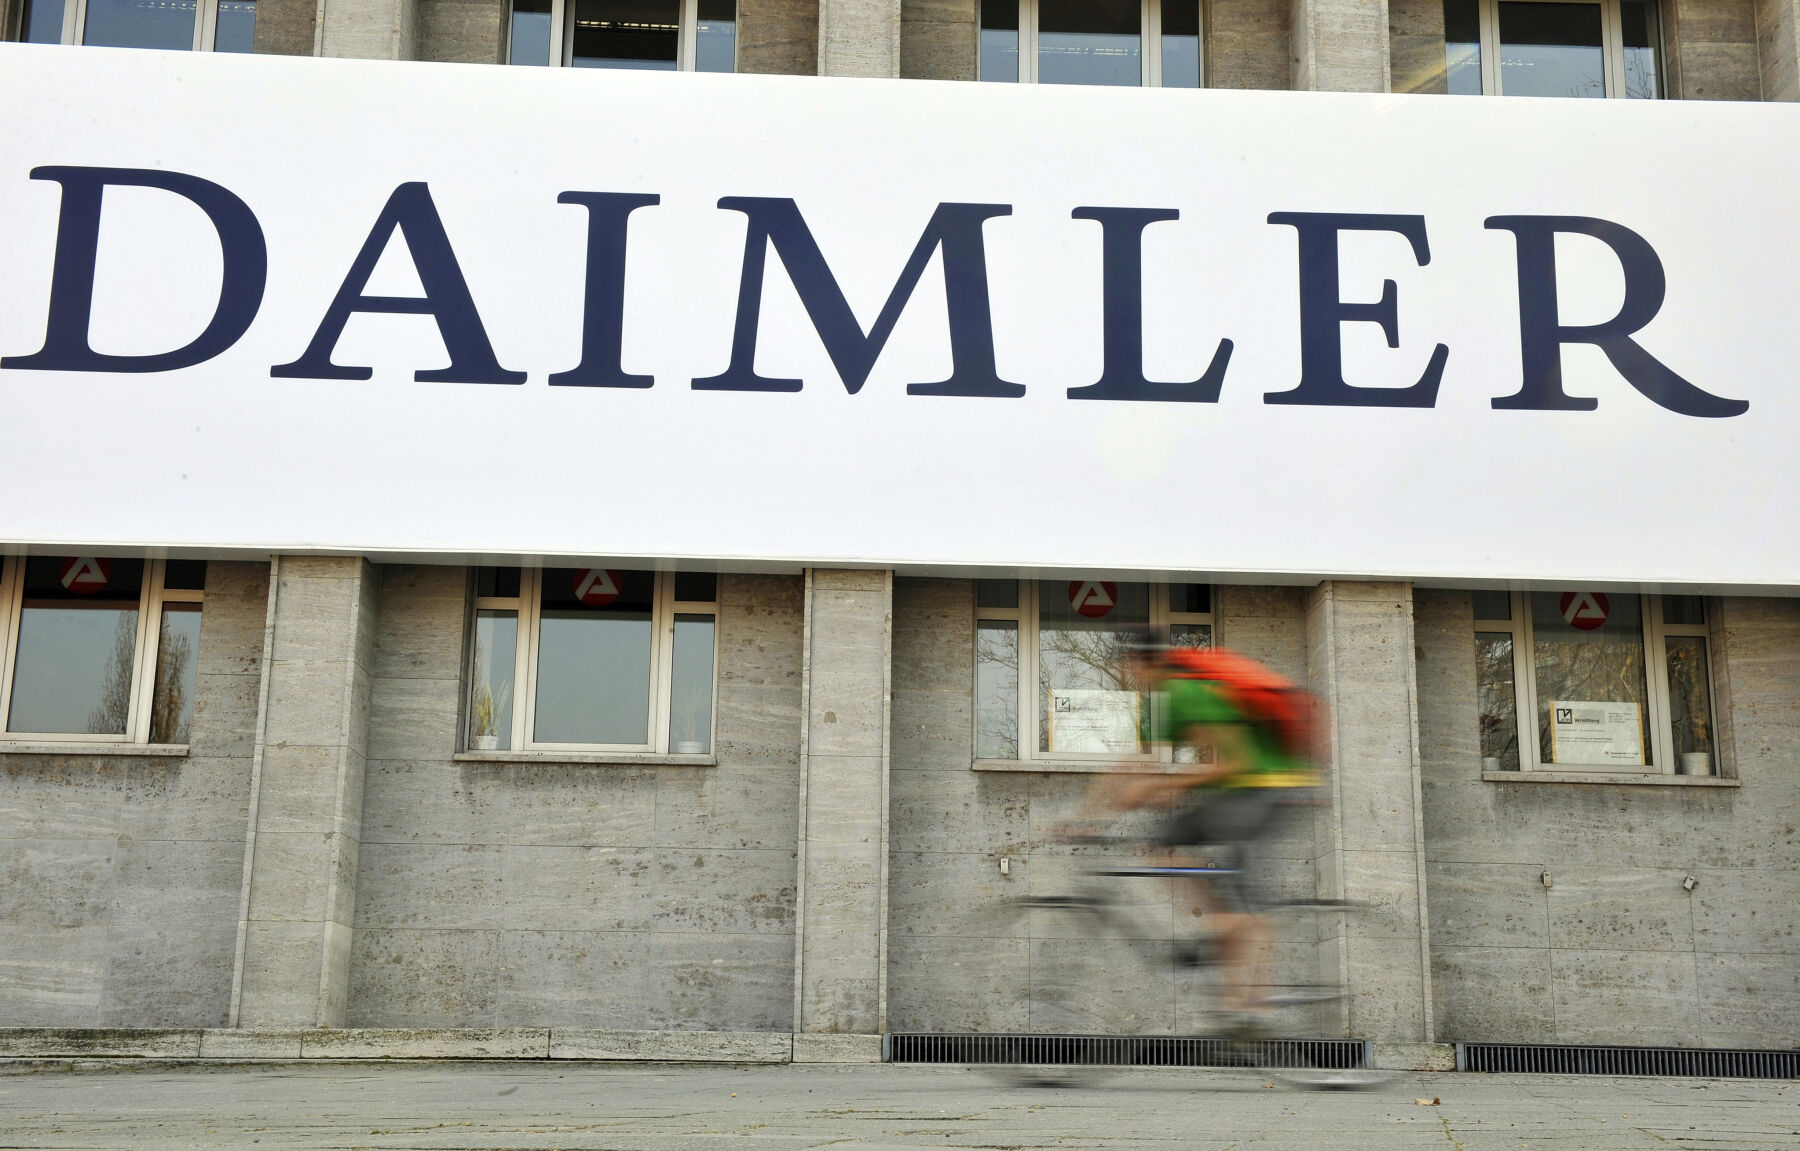 <p>FILE - A cyclist passes a logo of German car company Daimler in Berlin on April 8, 2009. German truck maker Daimler, Japan’s top automaker Toyota and two other automakers said Tuesday, May 30, 2023, they will work together on new technologies, including use of hydrogen fuel, to help fight climate change. (AP Photo/Gero Breloer, File)</p>   PHOTO CREDIT: Gero Breloer 